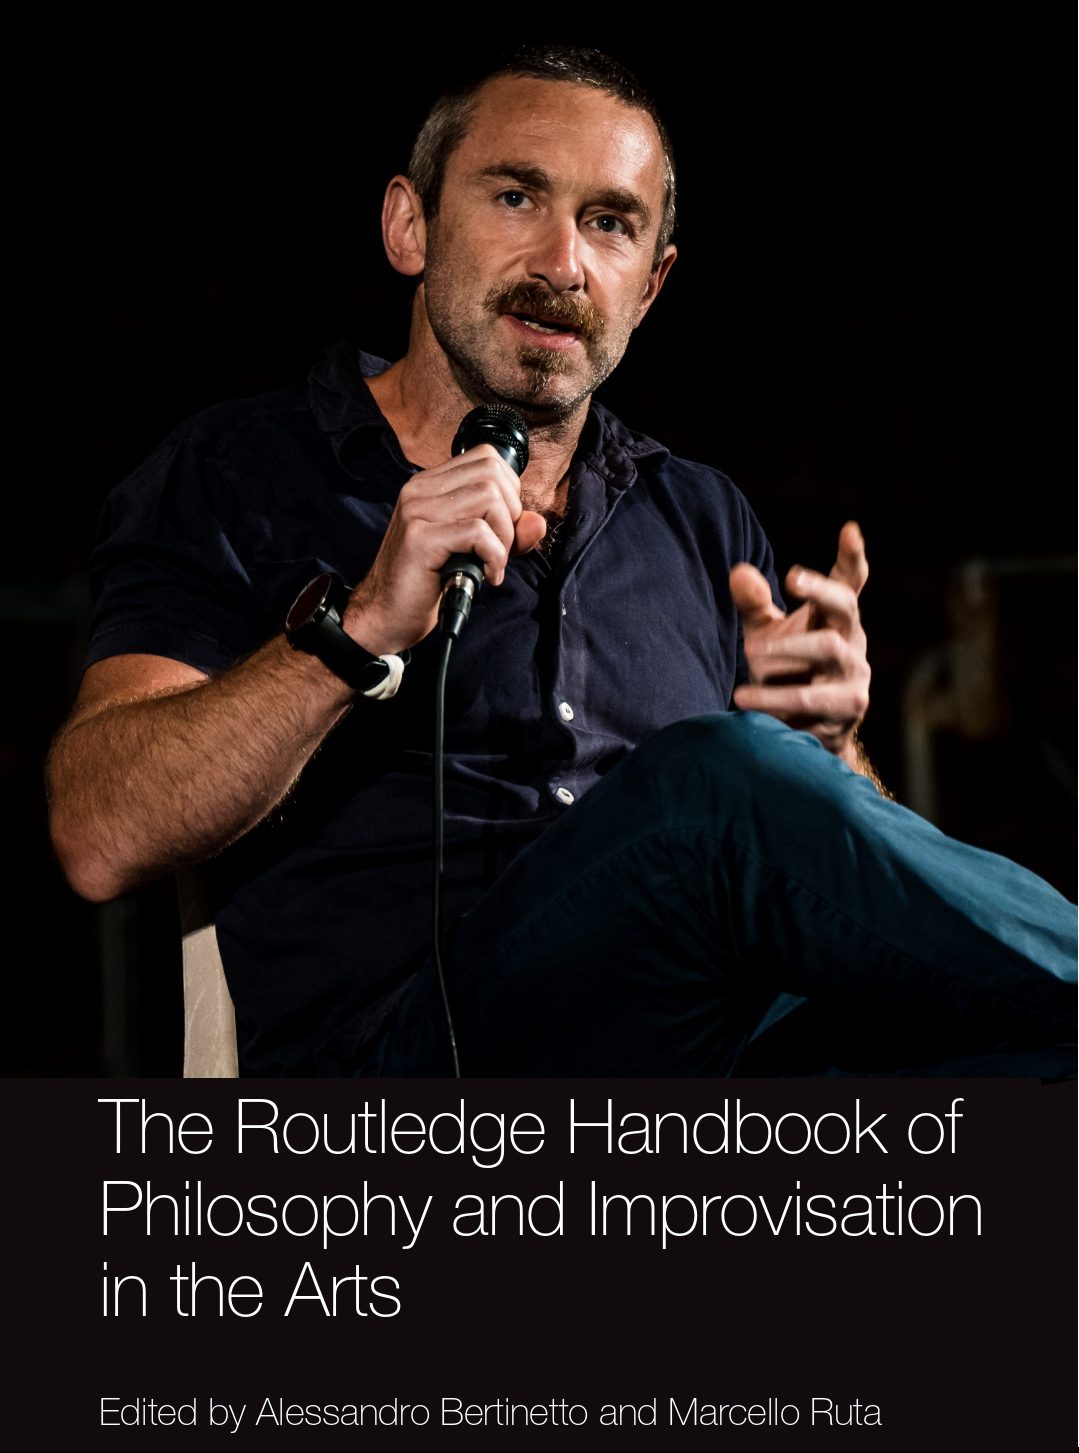 imp[or]trait #7: The Routledge Handbook of Philosophy and Improvisation in the Arts